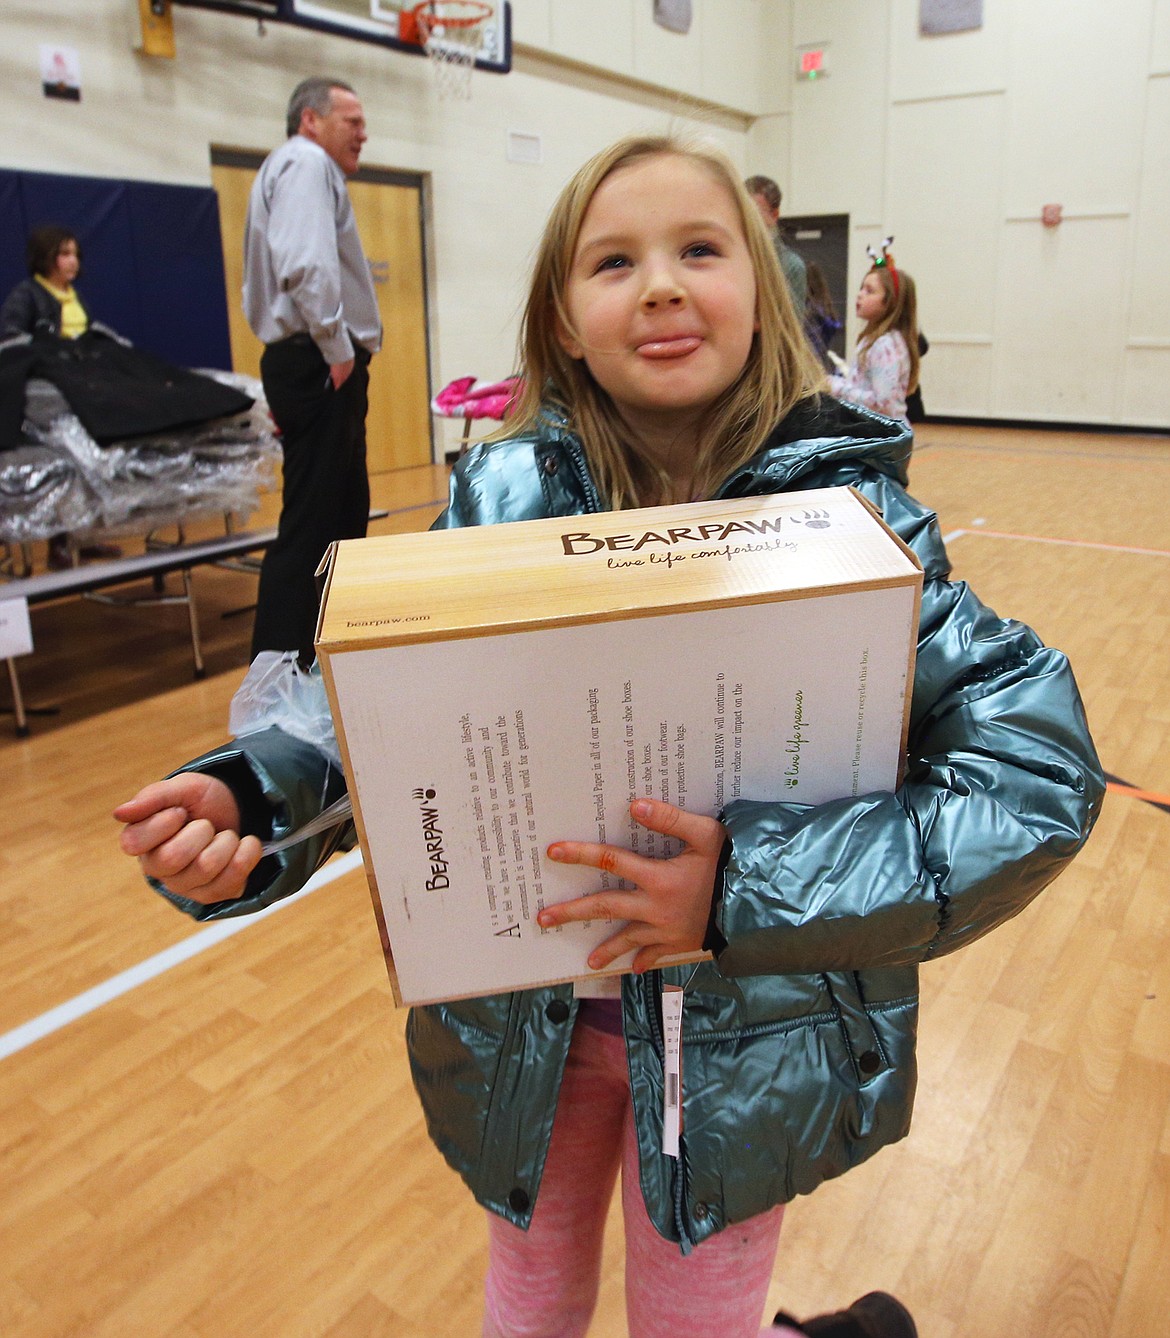 Willow Calder smiles as she carries the new boots she received Dec. 14 at the Lola & Duane Hagadone Boys & Girls Club.